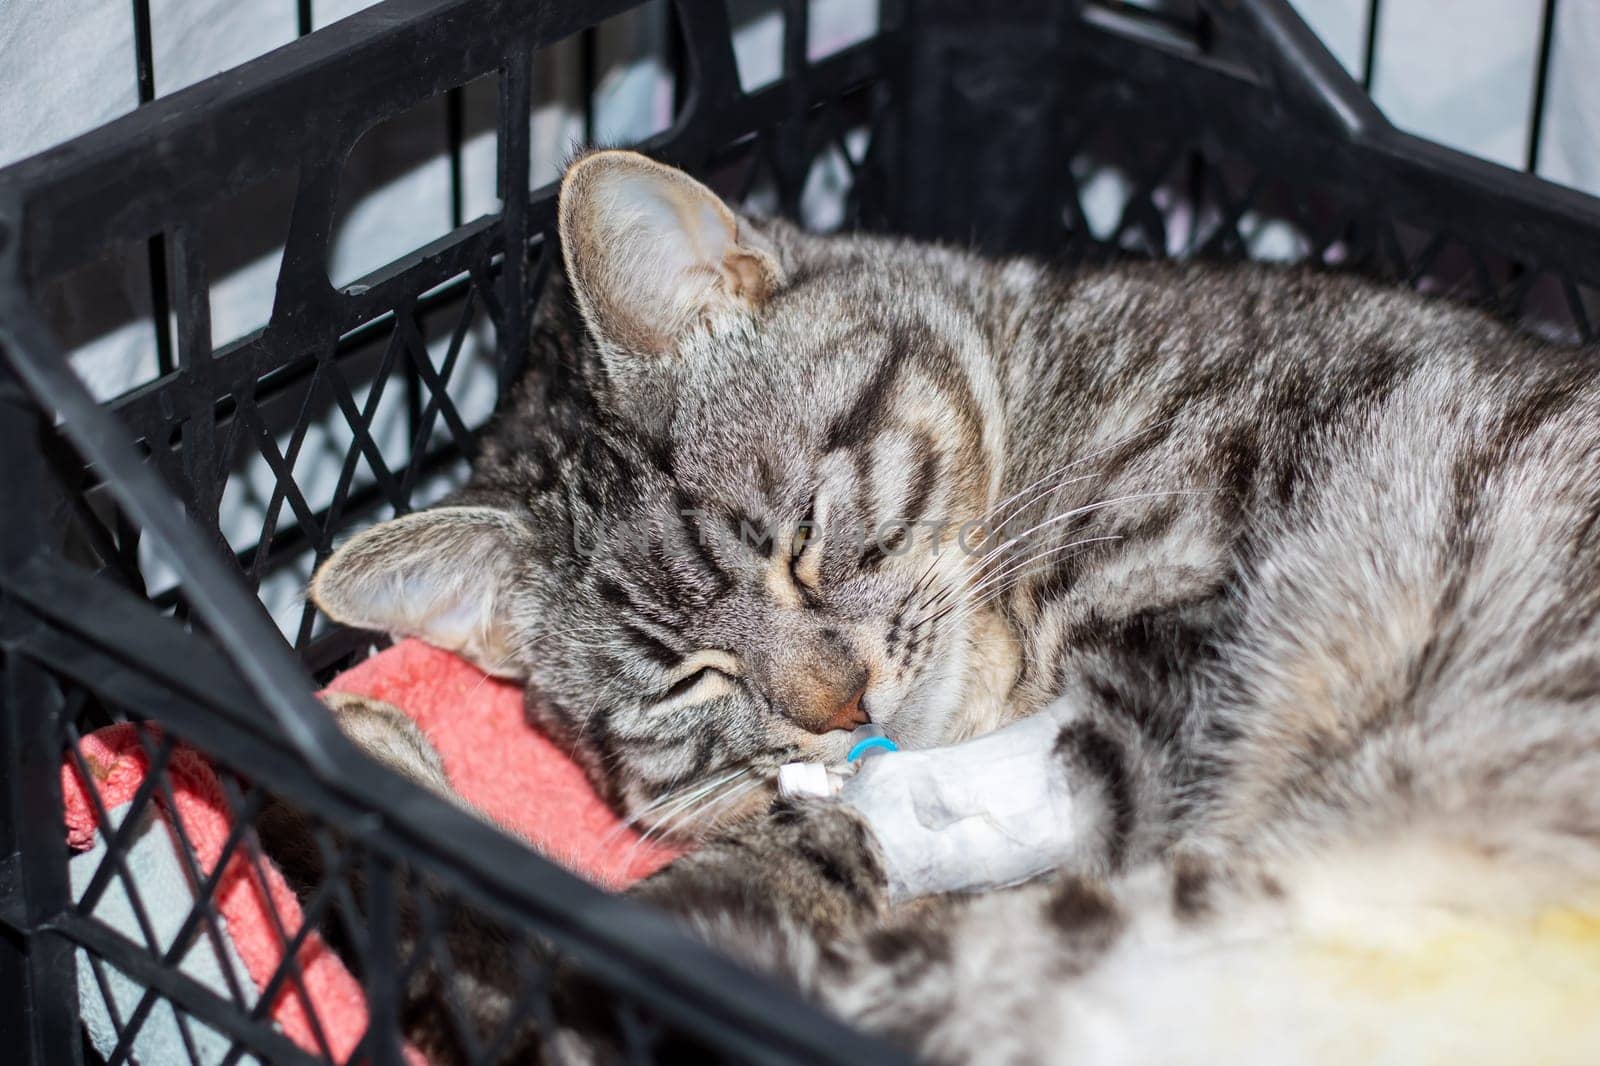 A Felidae, small to mediumsized carnivore cat with whiskers and fur is peacefully sleeping in a crate with an IV in its mouth